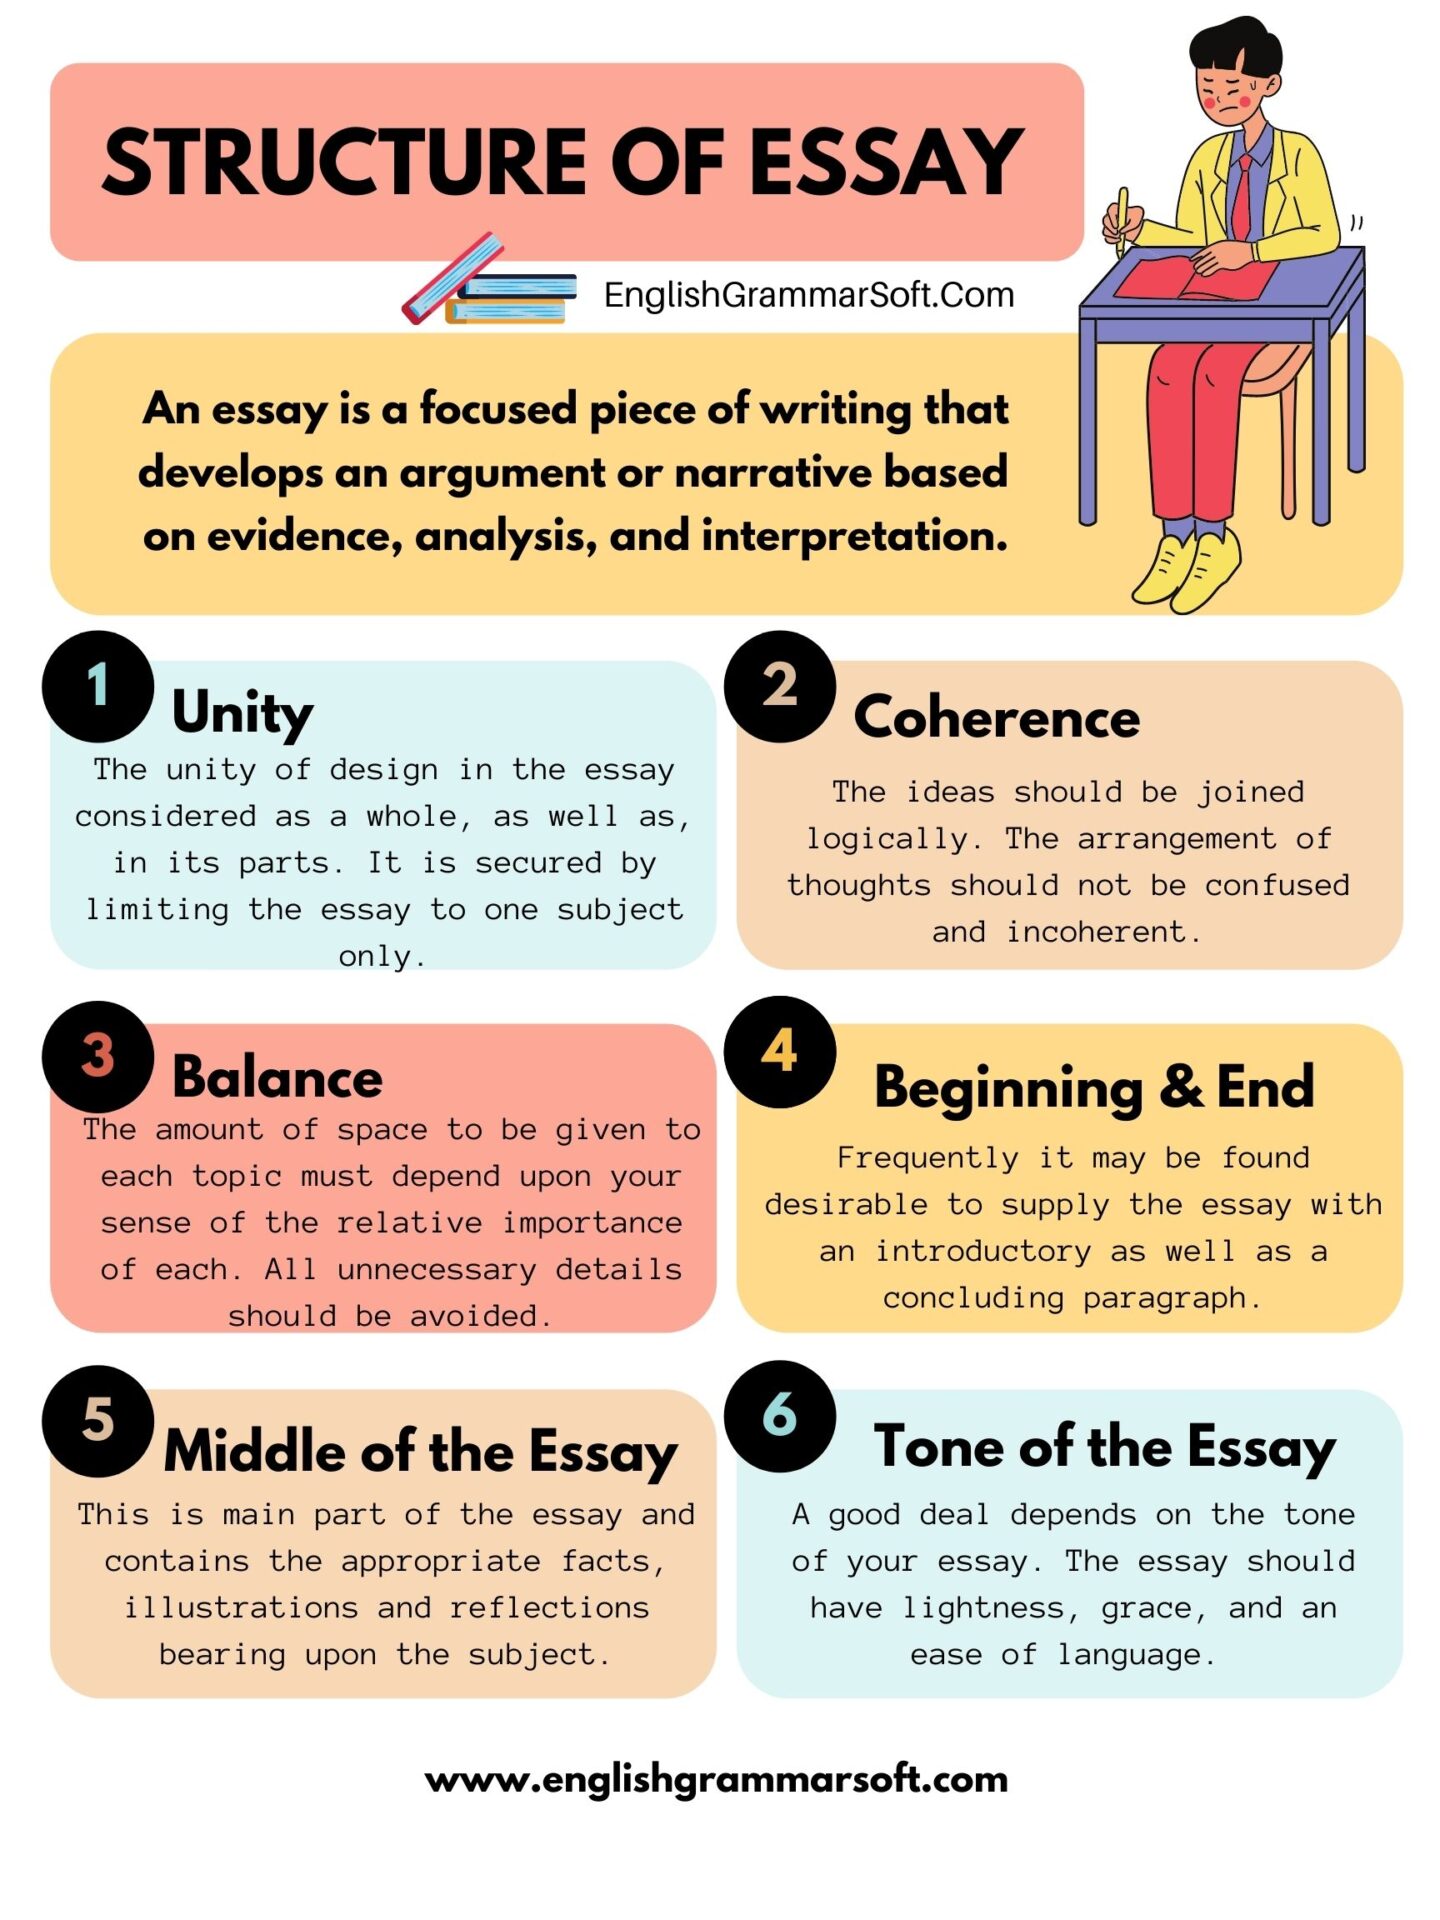 5 Ways To Get Through To Your essay